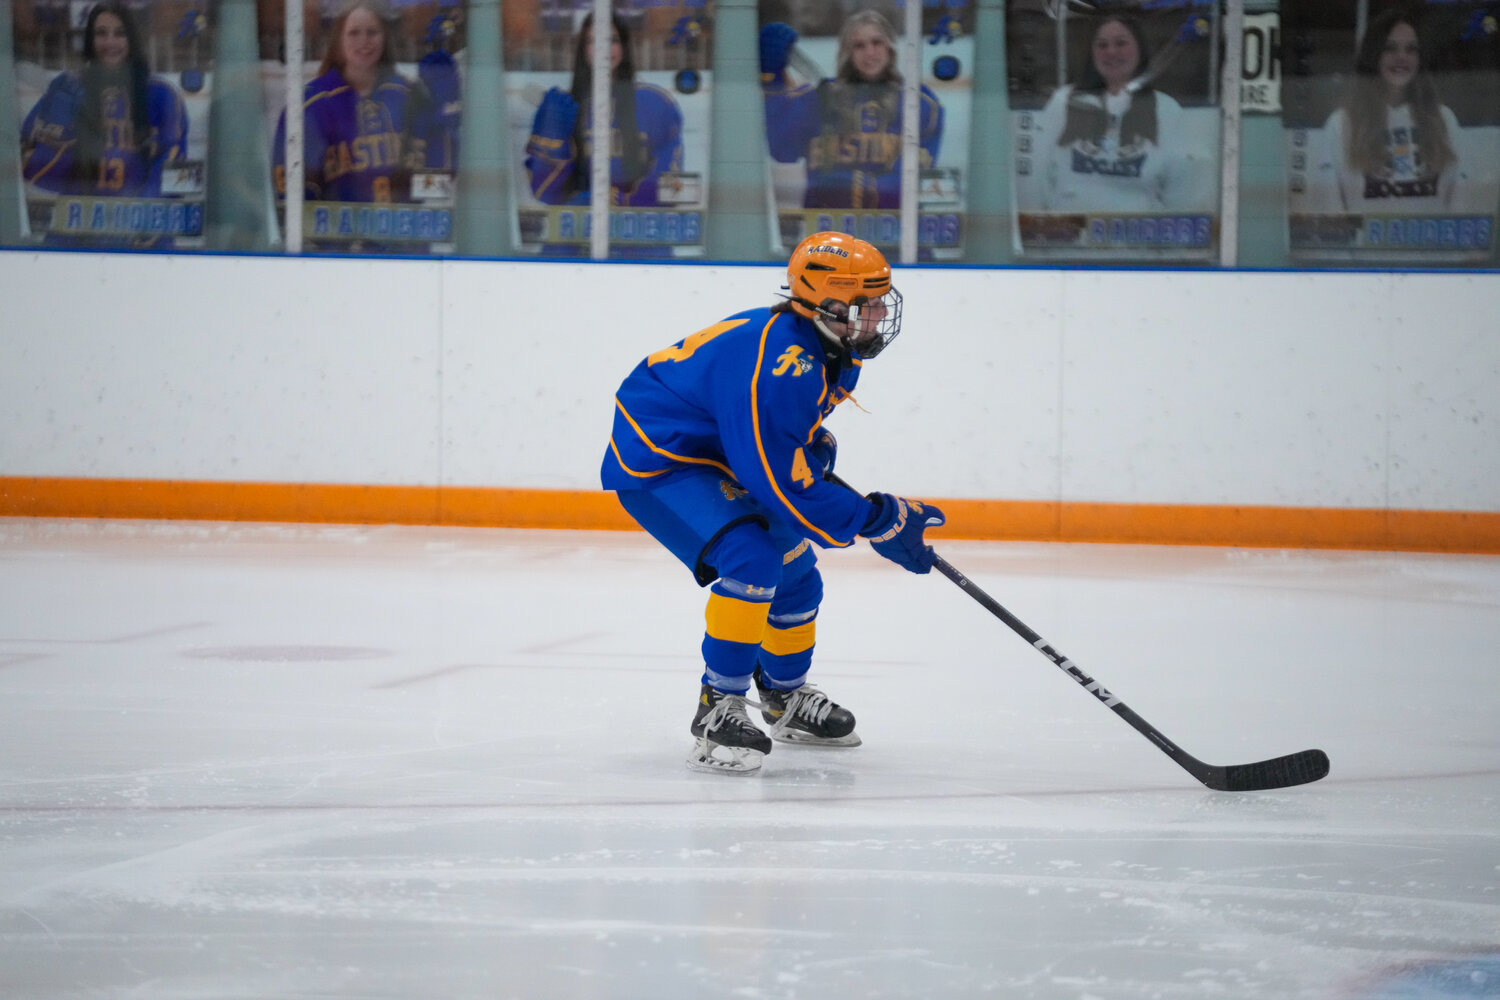 Haley Siebenaler scored the first goal against Farmington just 1:25 into the first period in the Raider’s 4-2 loss on Tuesday of last week.